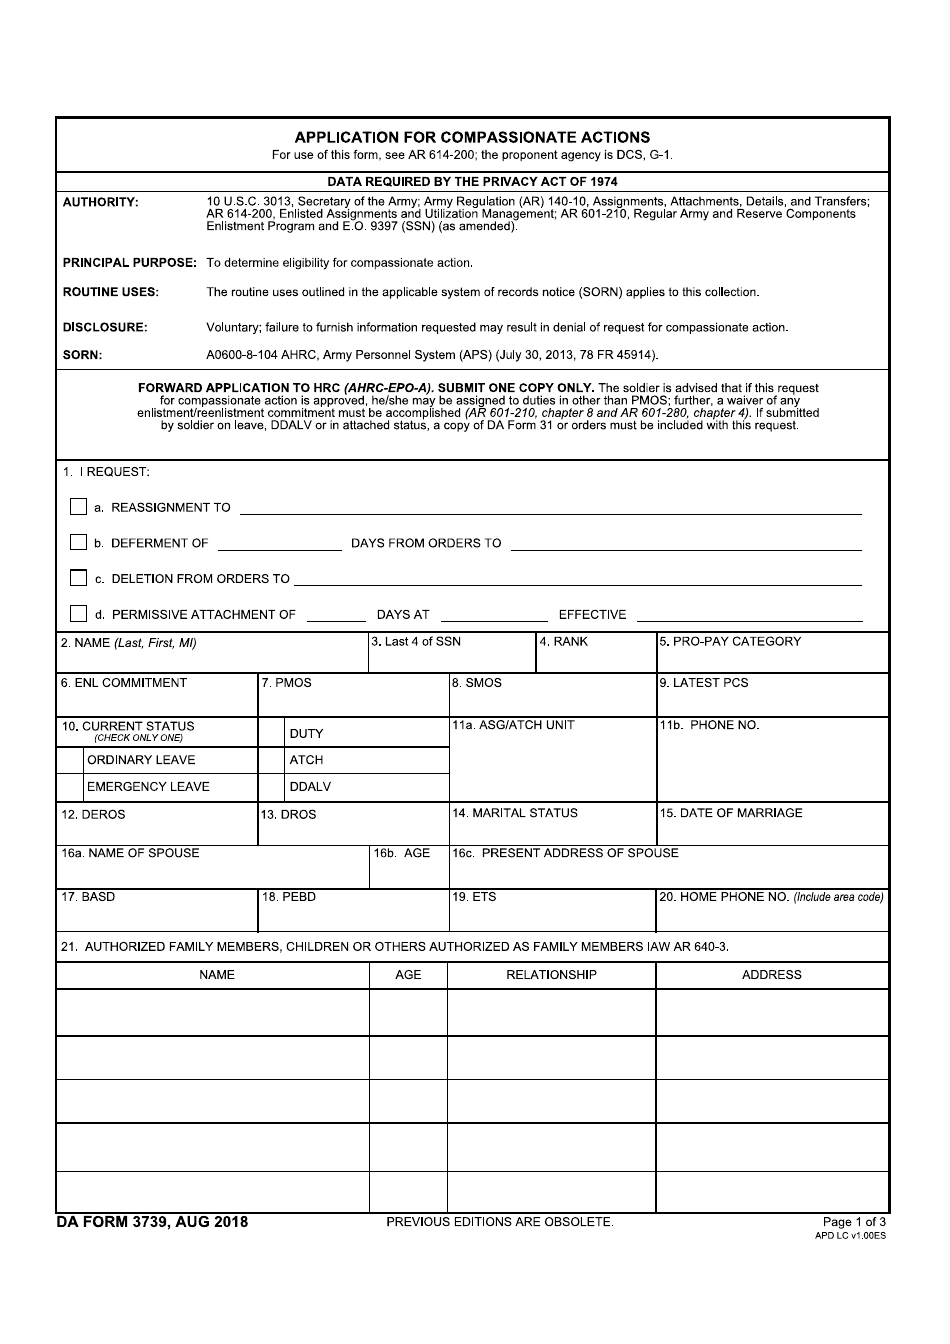 DA Form 3739 Application for Compassionate Actions, Page 1